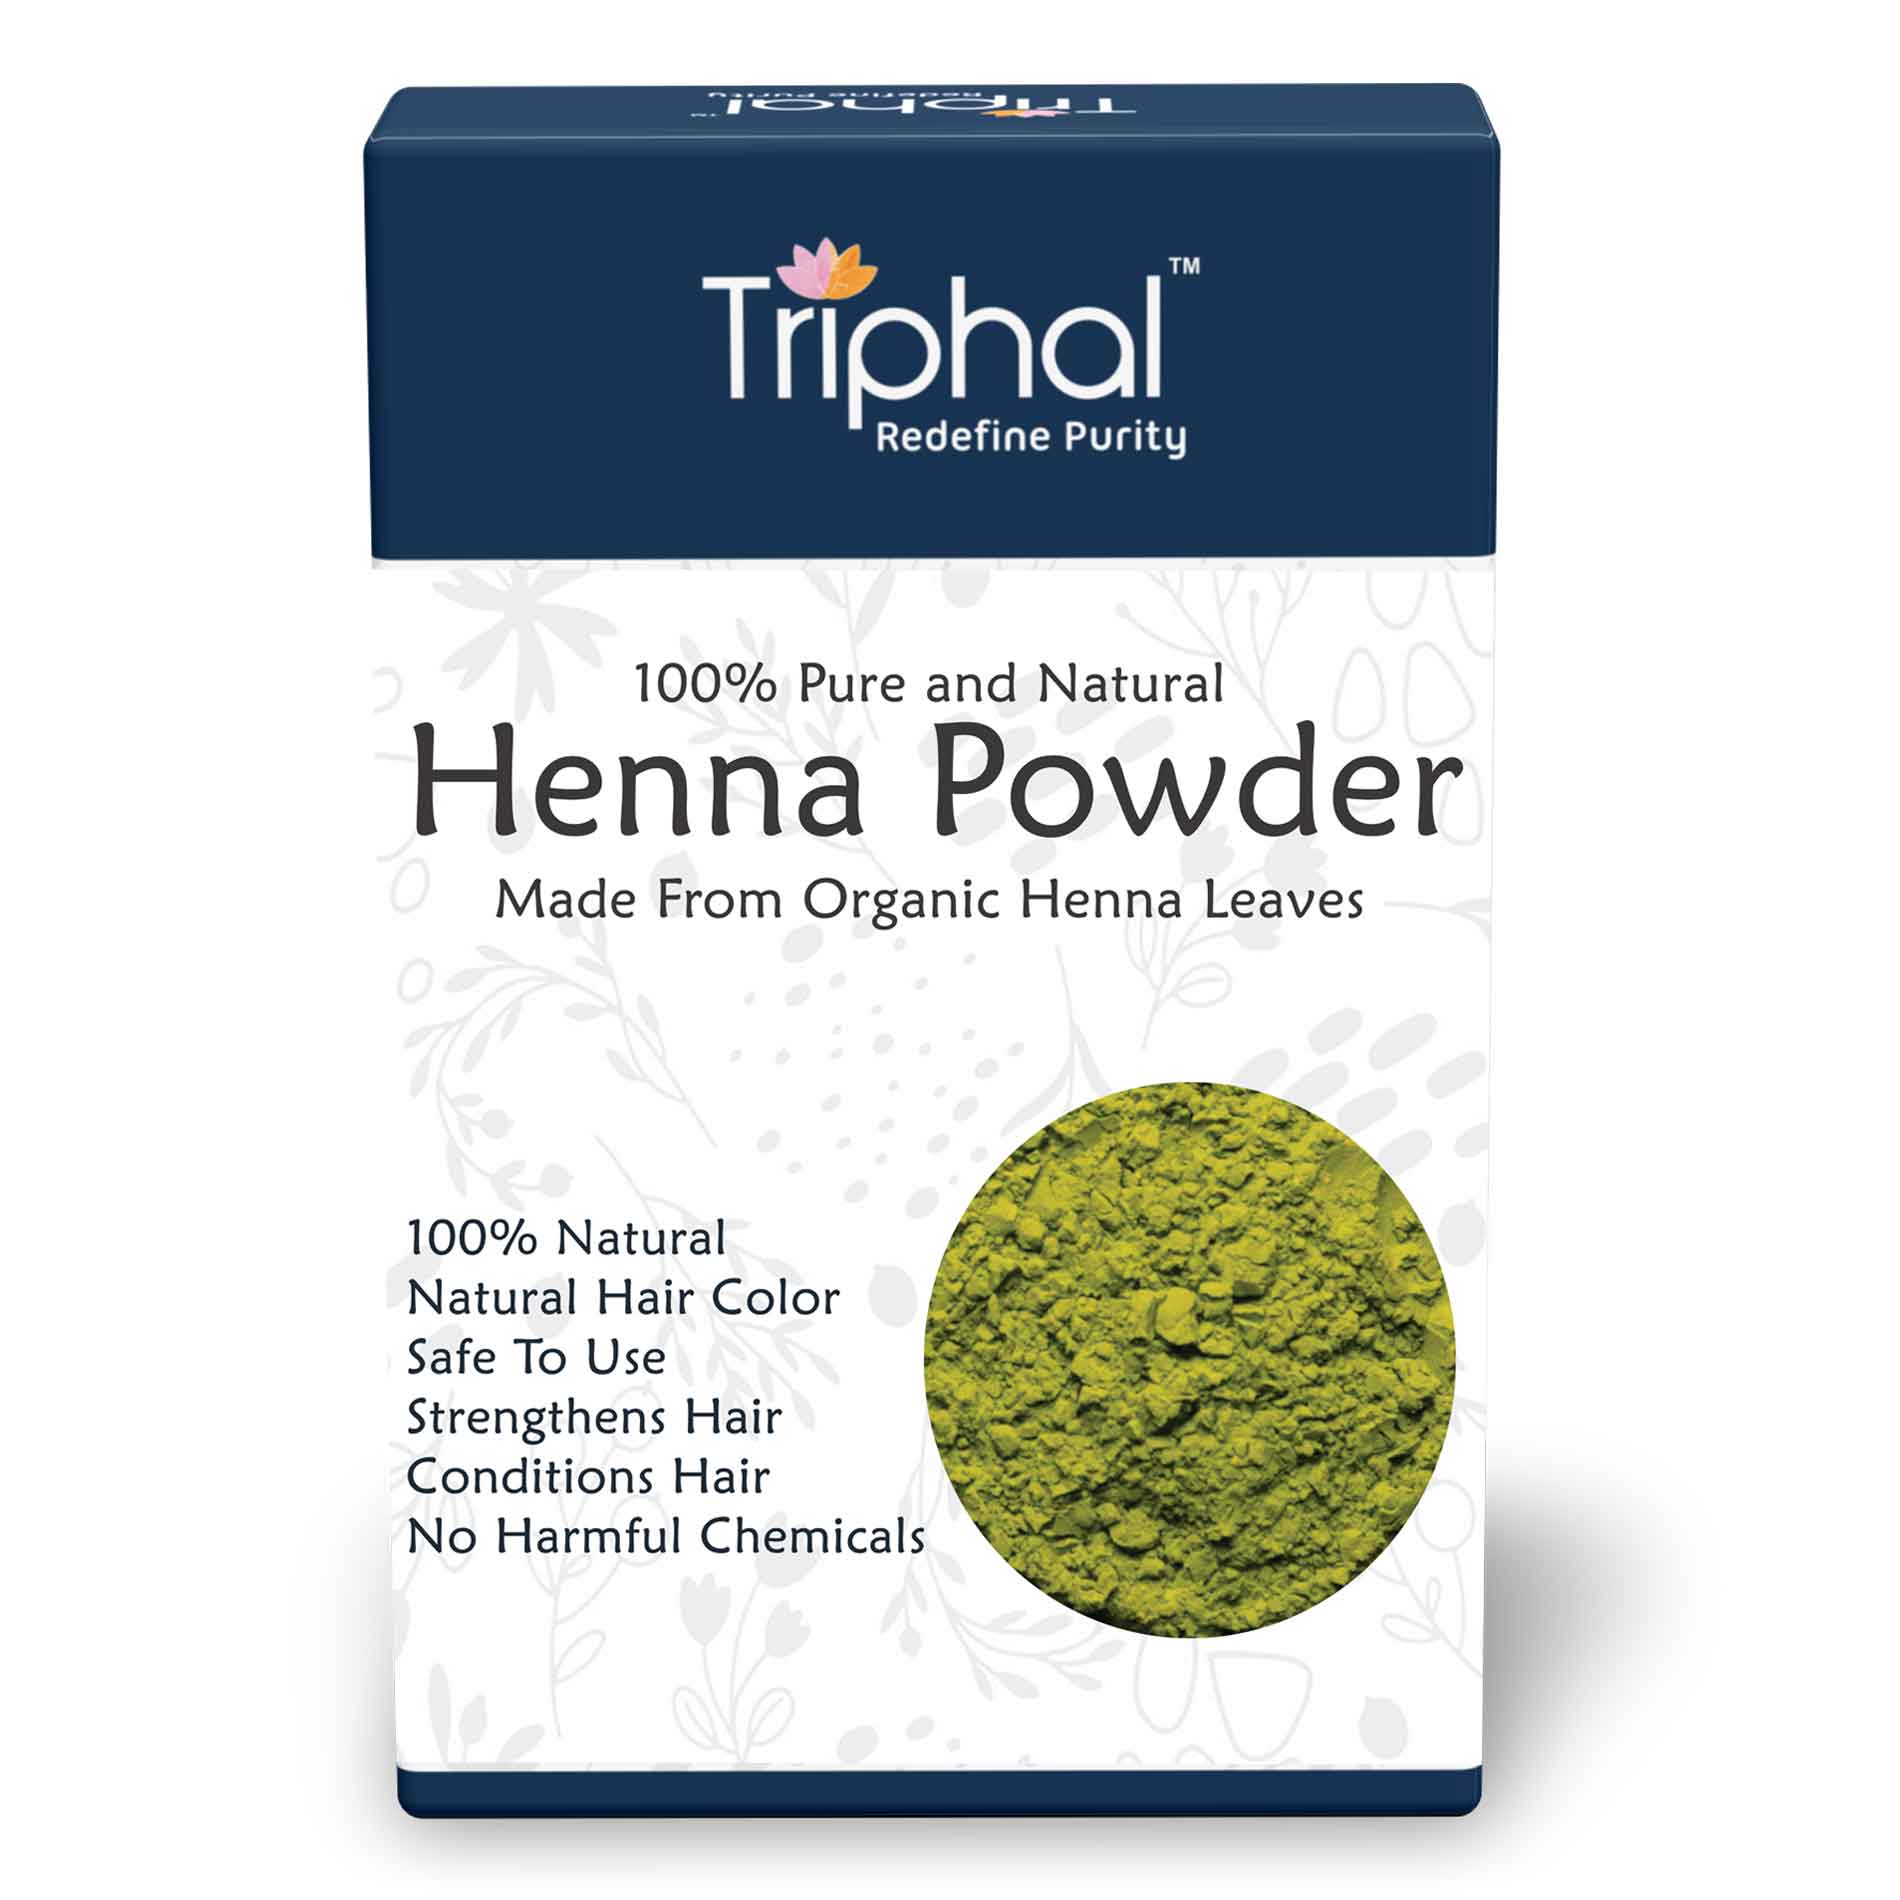 Henna Powder For Hair and Skin - Original and Pure - Also Known As mehendi